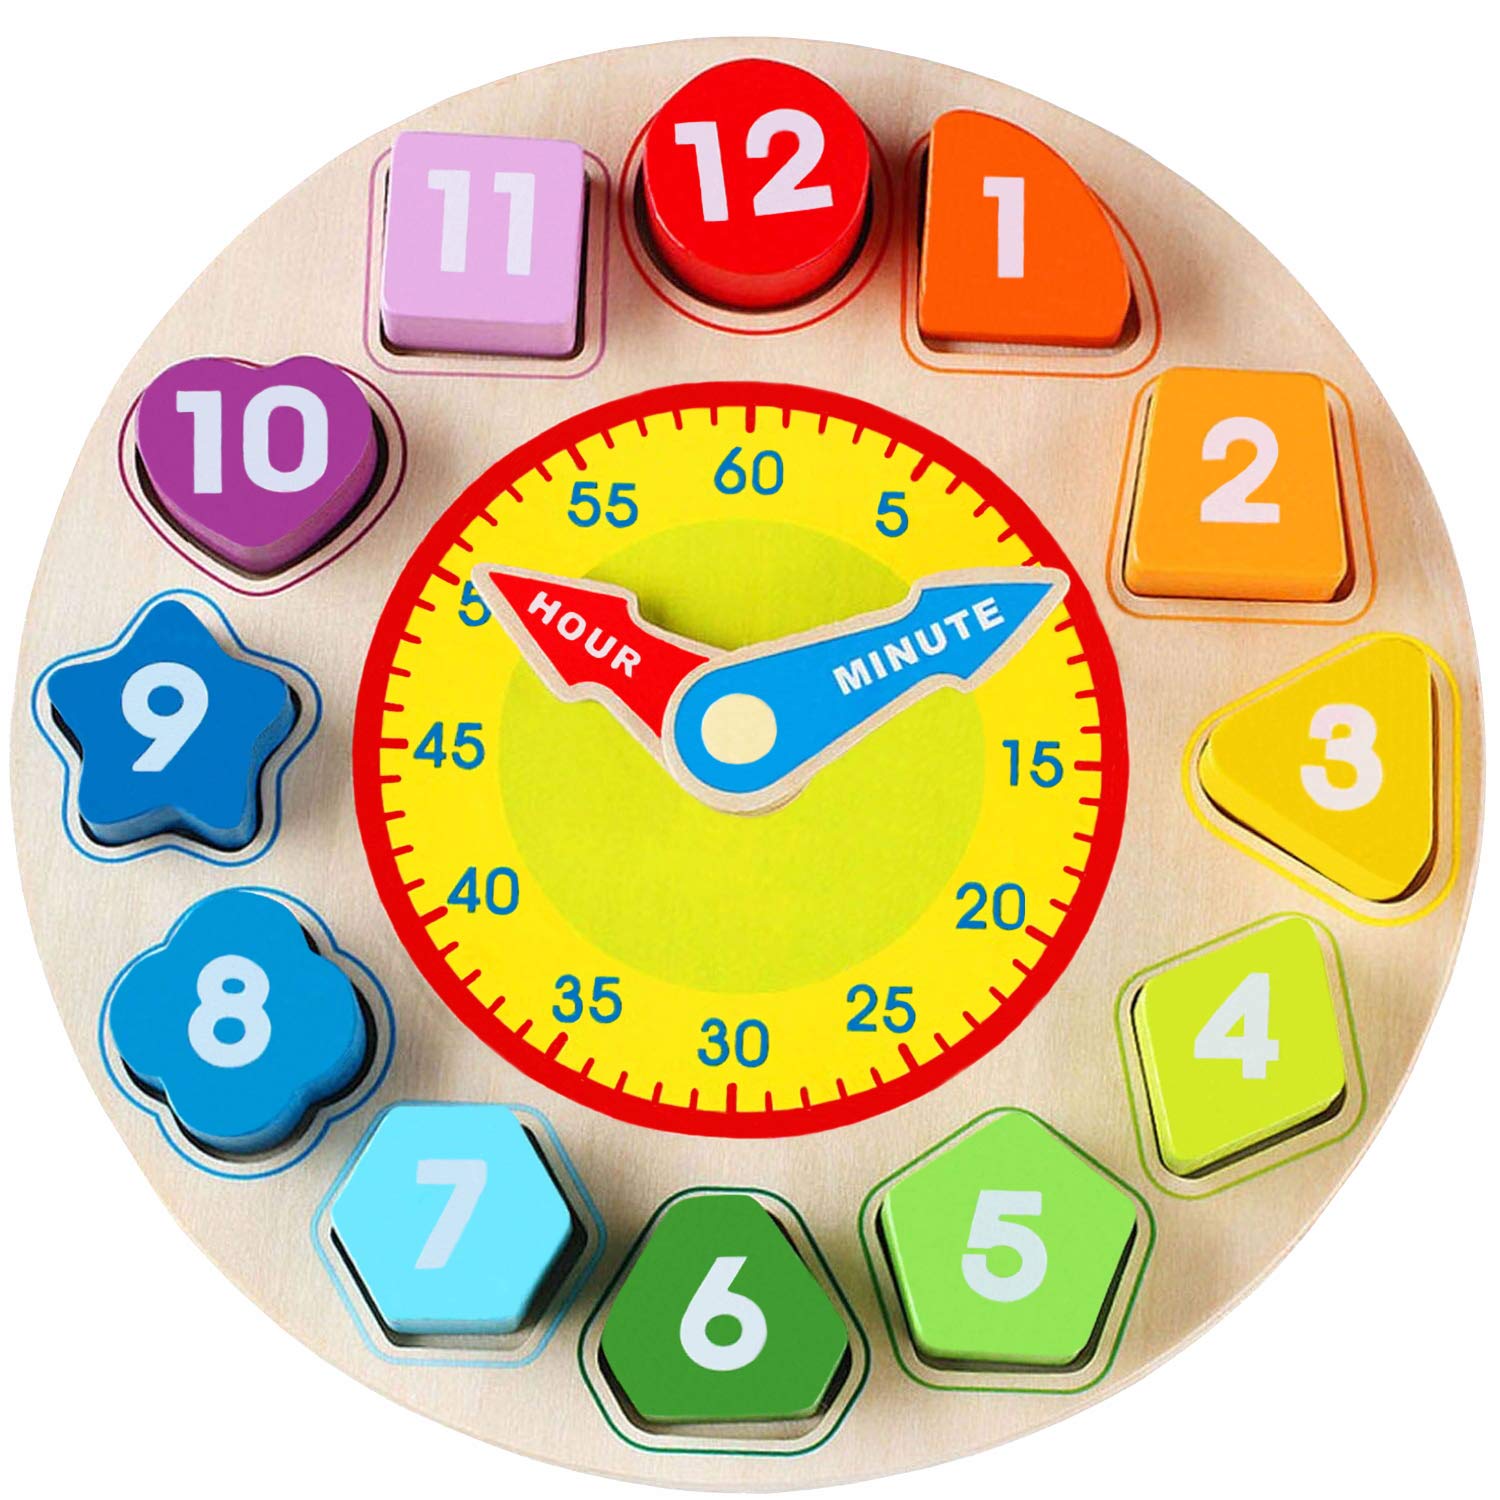 Garlictoys Wooden Shape Color Clock Puzzle-Teaching Time Sorting Number Blocks, Stacking Sorter Jigsaw Montessori Early Learning Montessori Educational Toy Gift for3+ Year Old Toddler Baby Kids